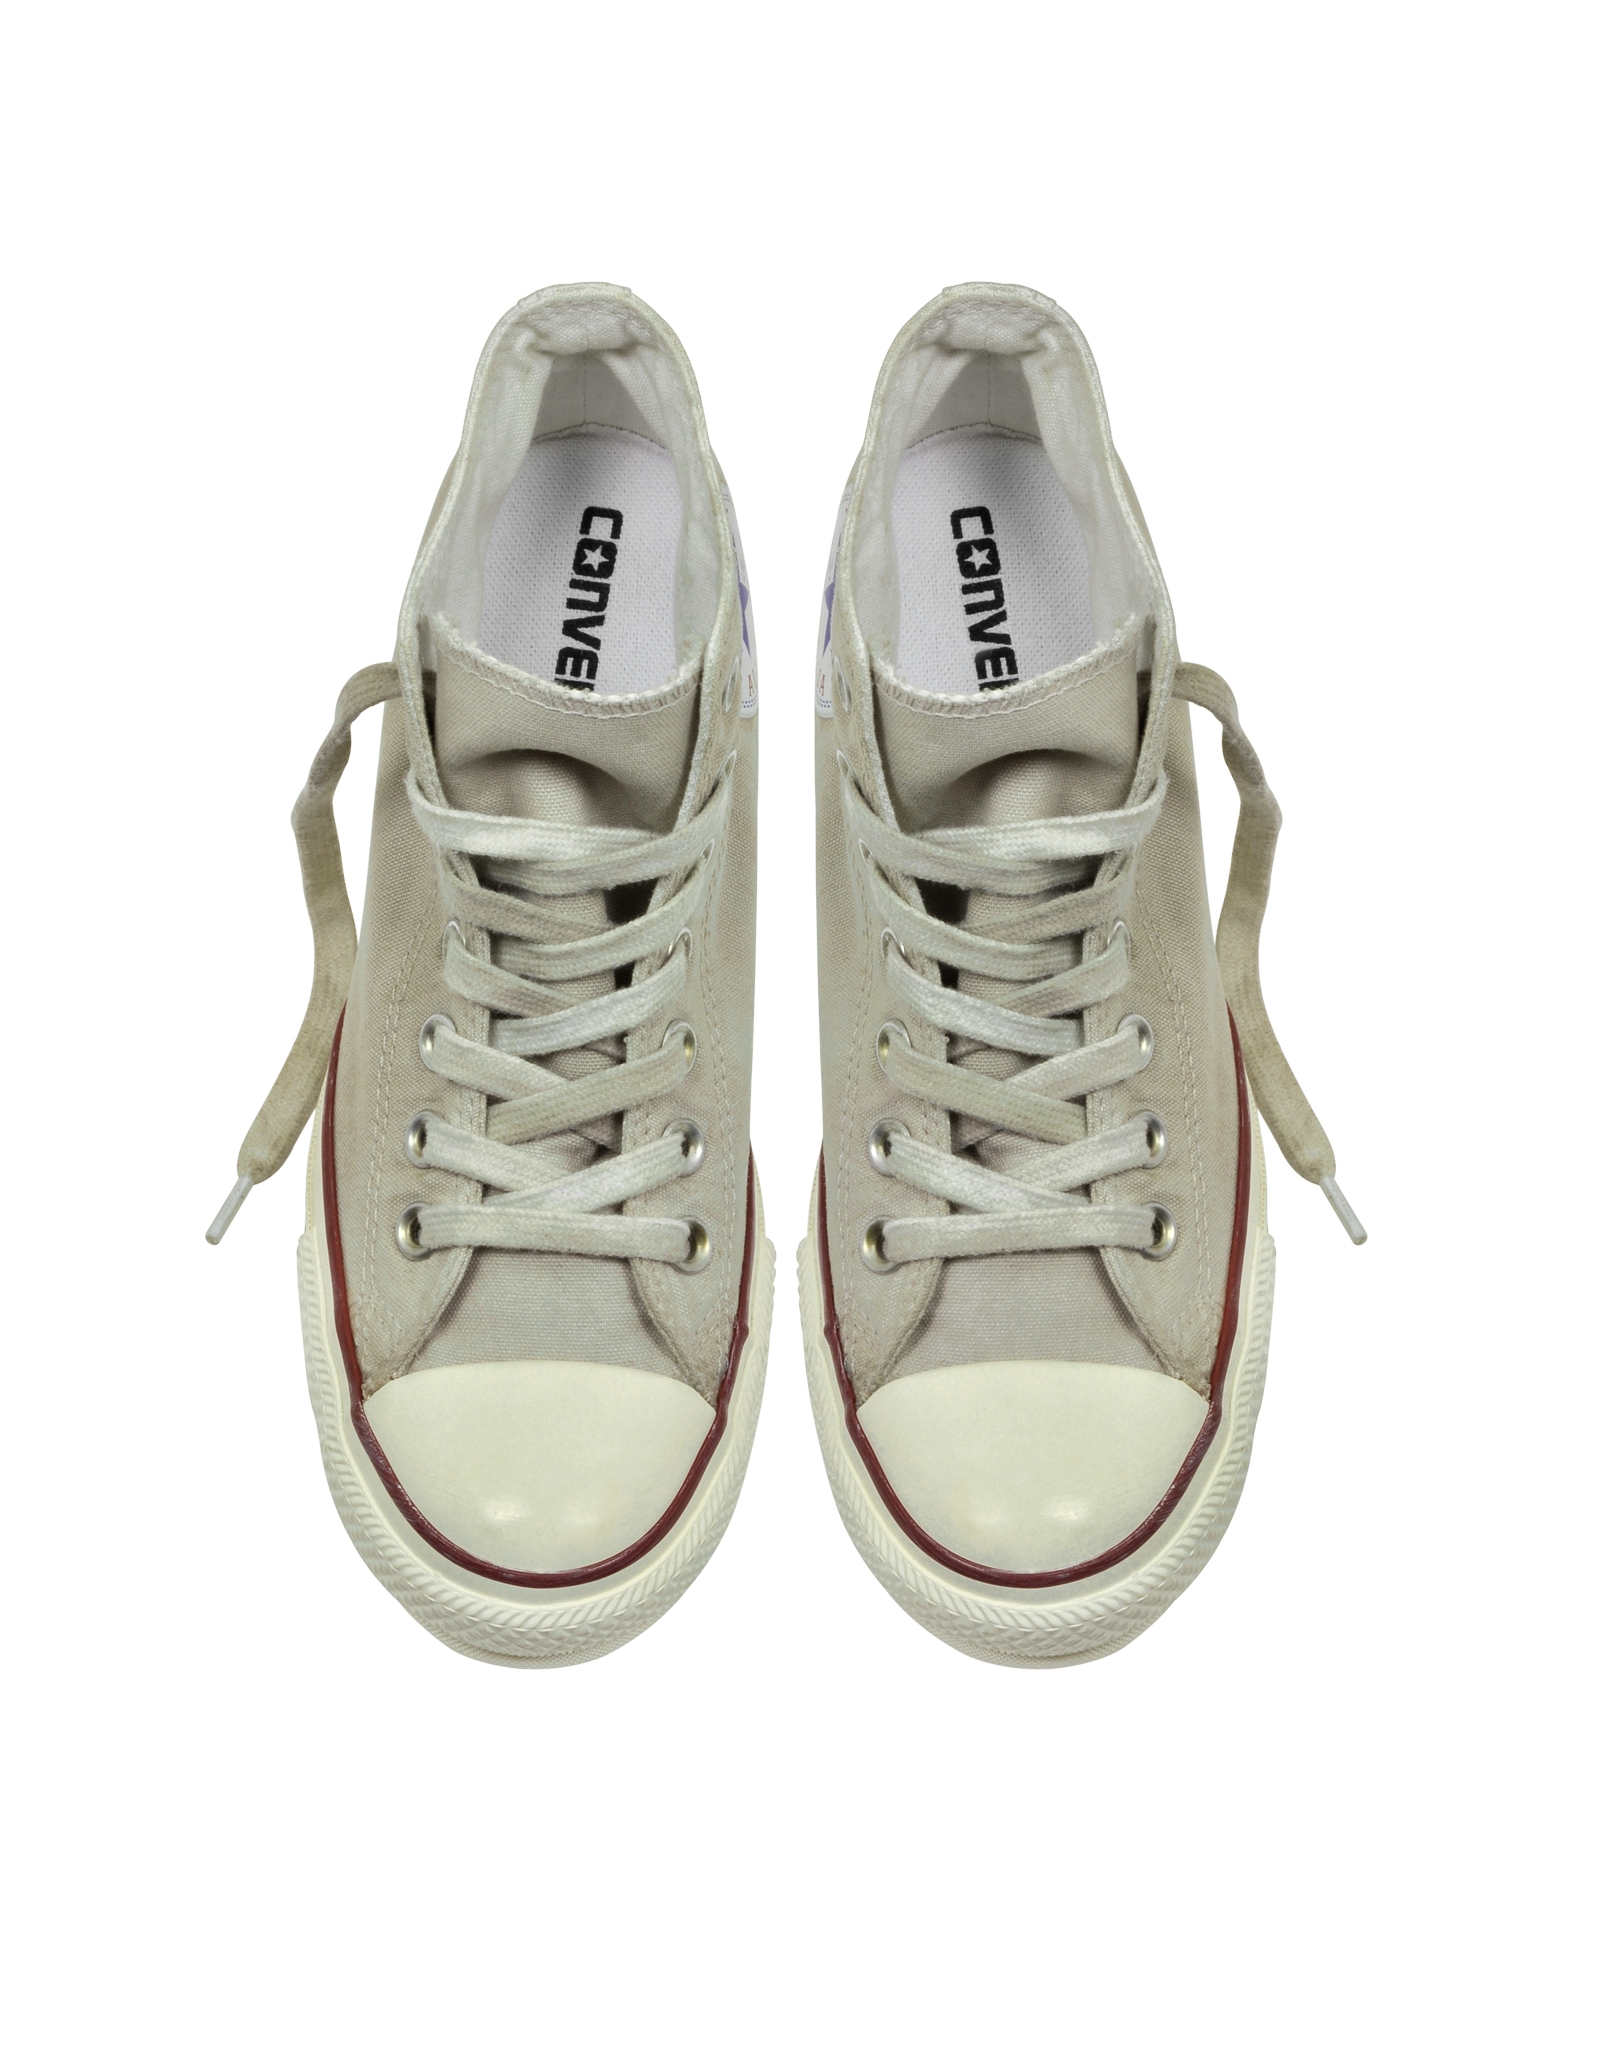 converse all star mid lux canvas